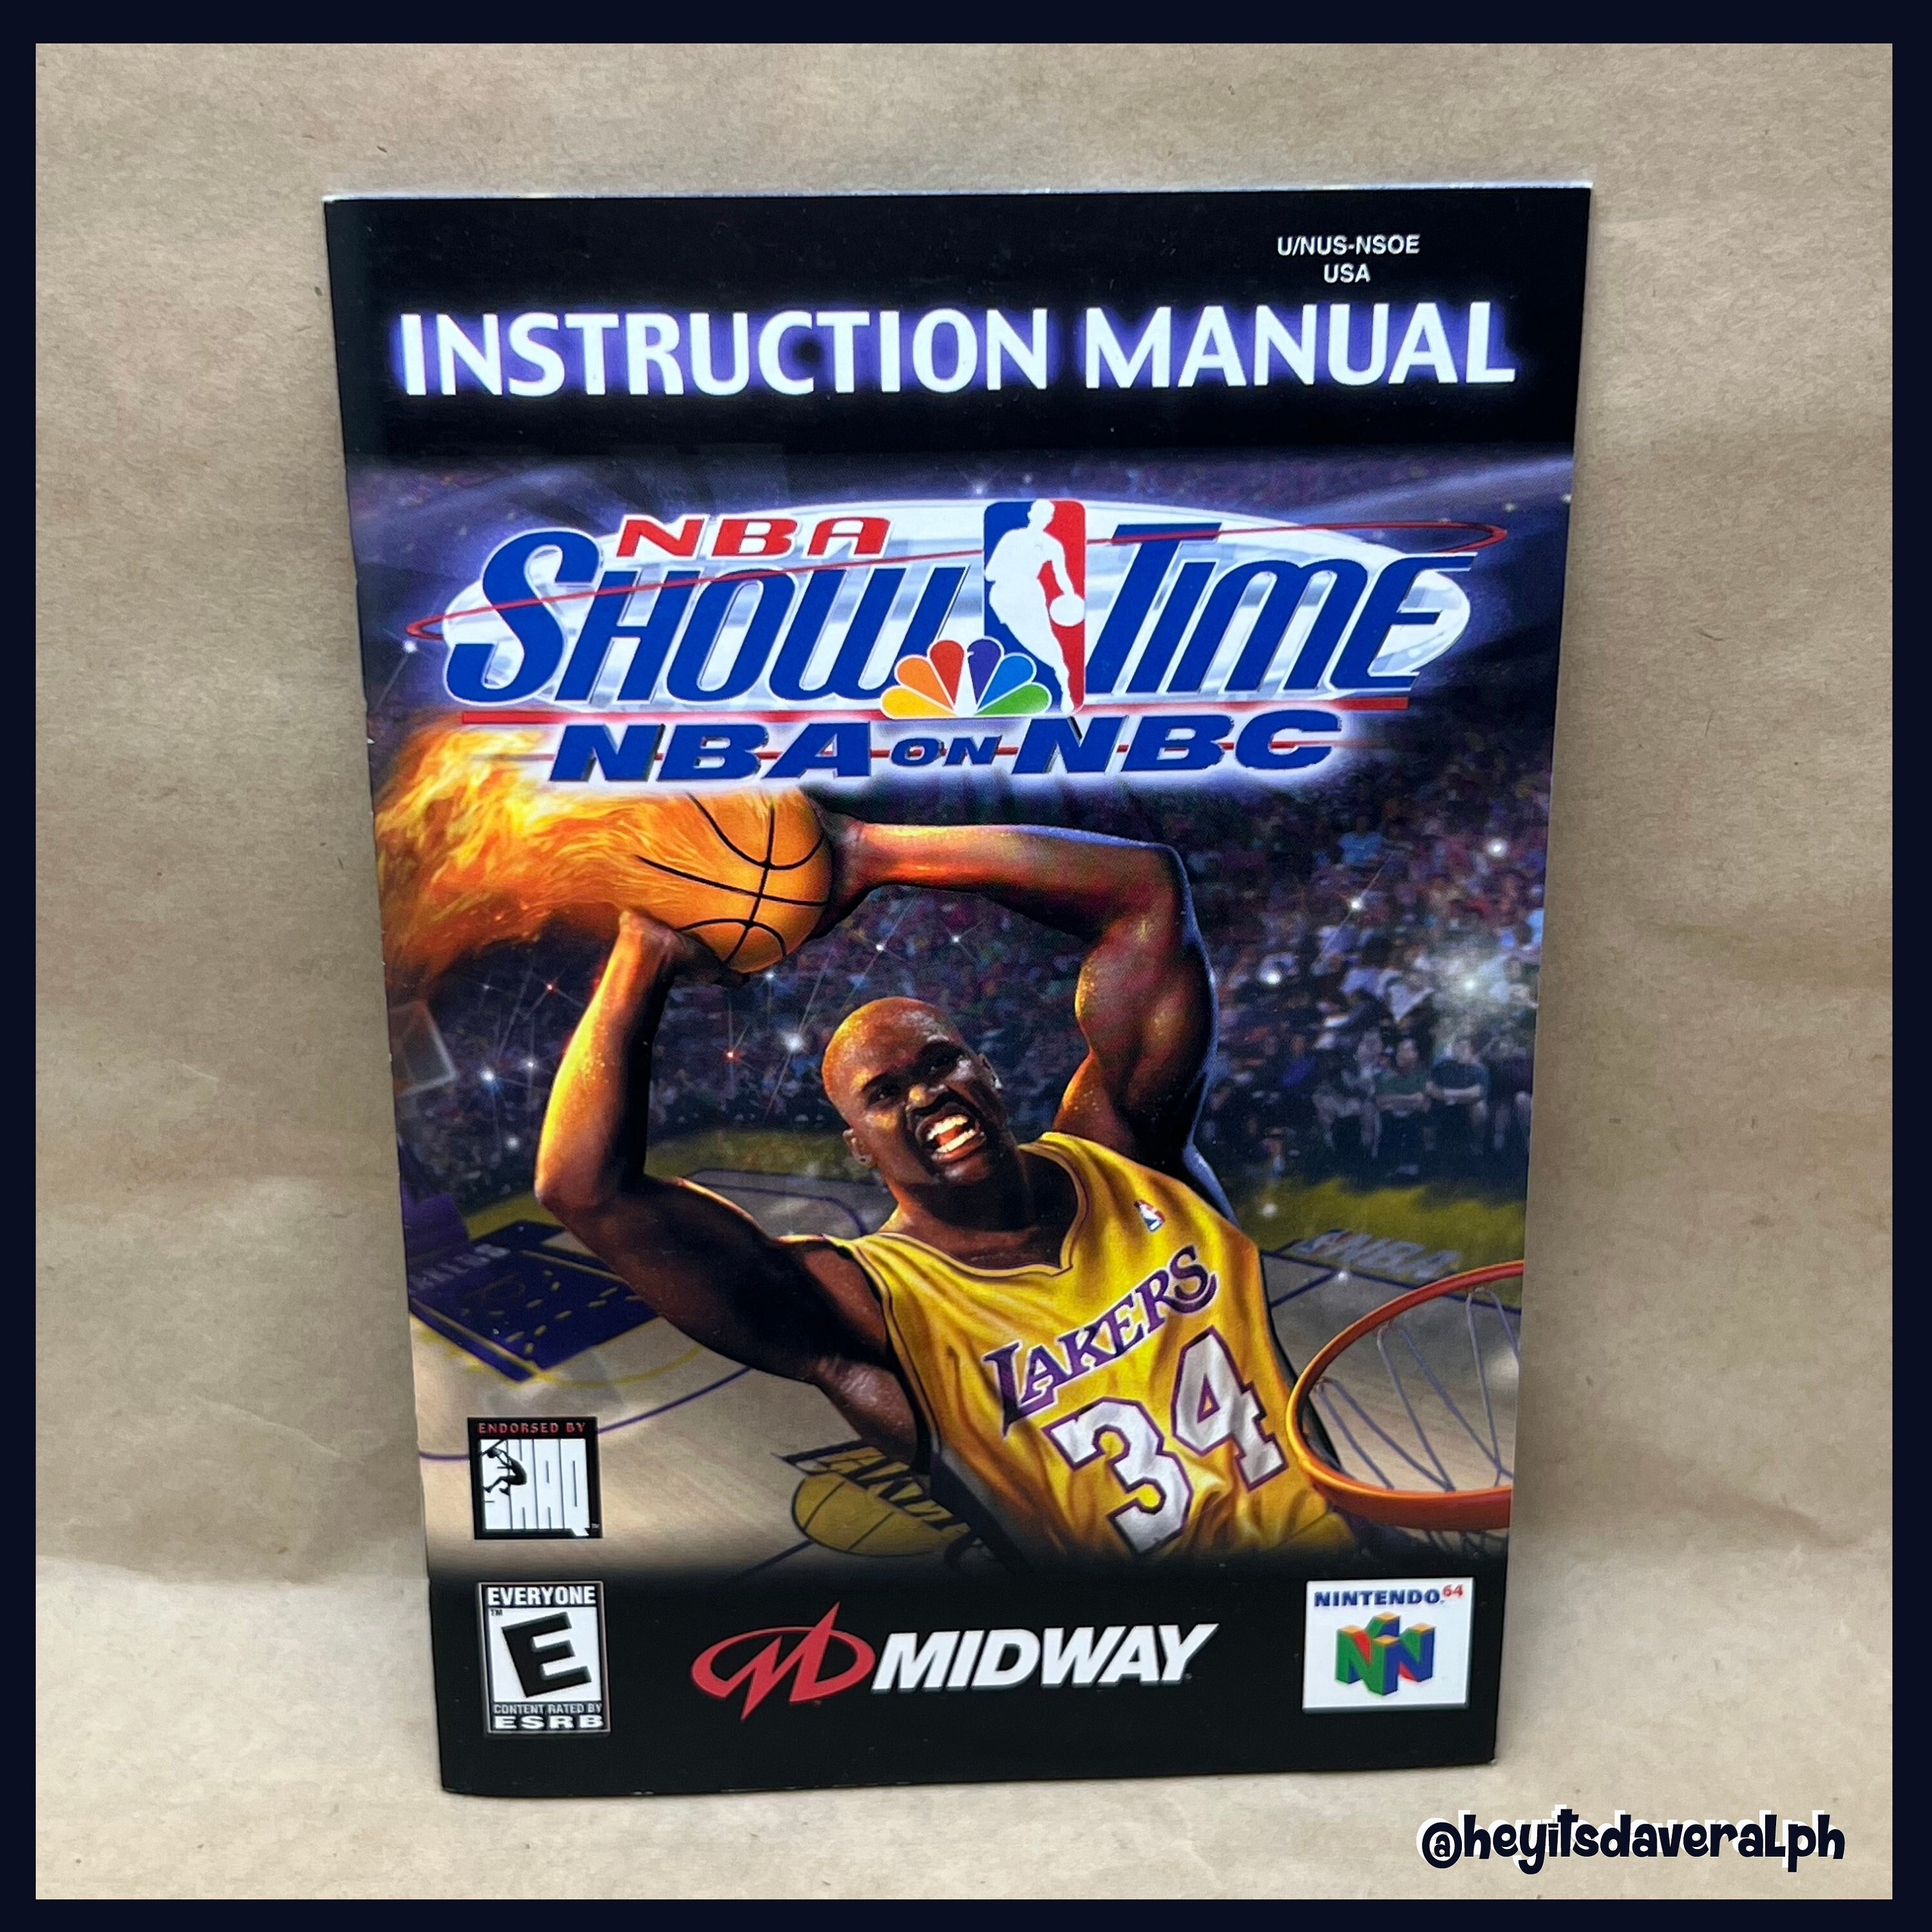 The Sega Notebook: Great Basketball Instructions